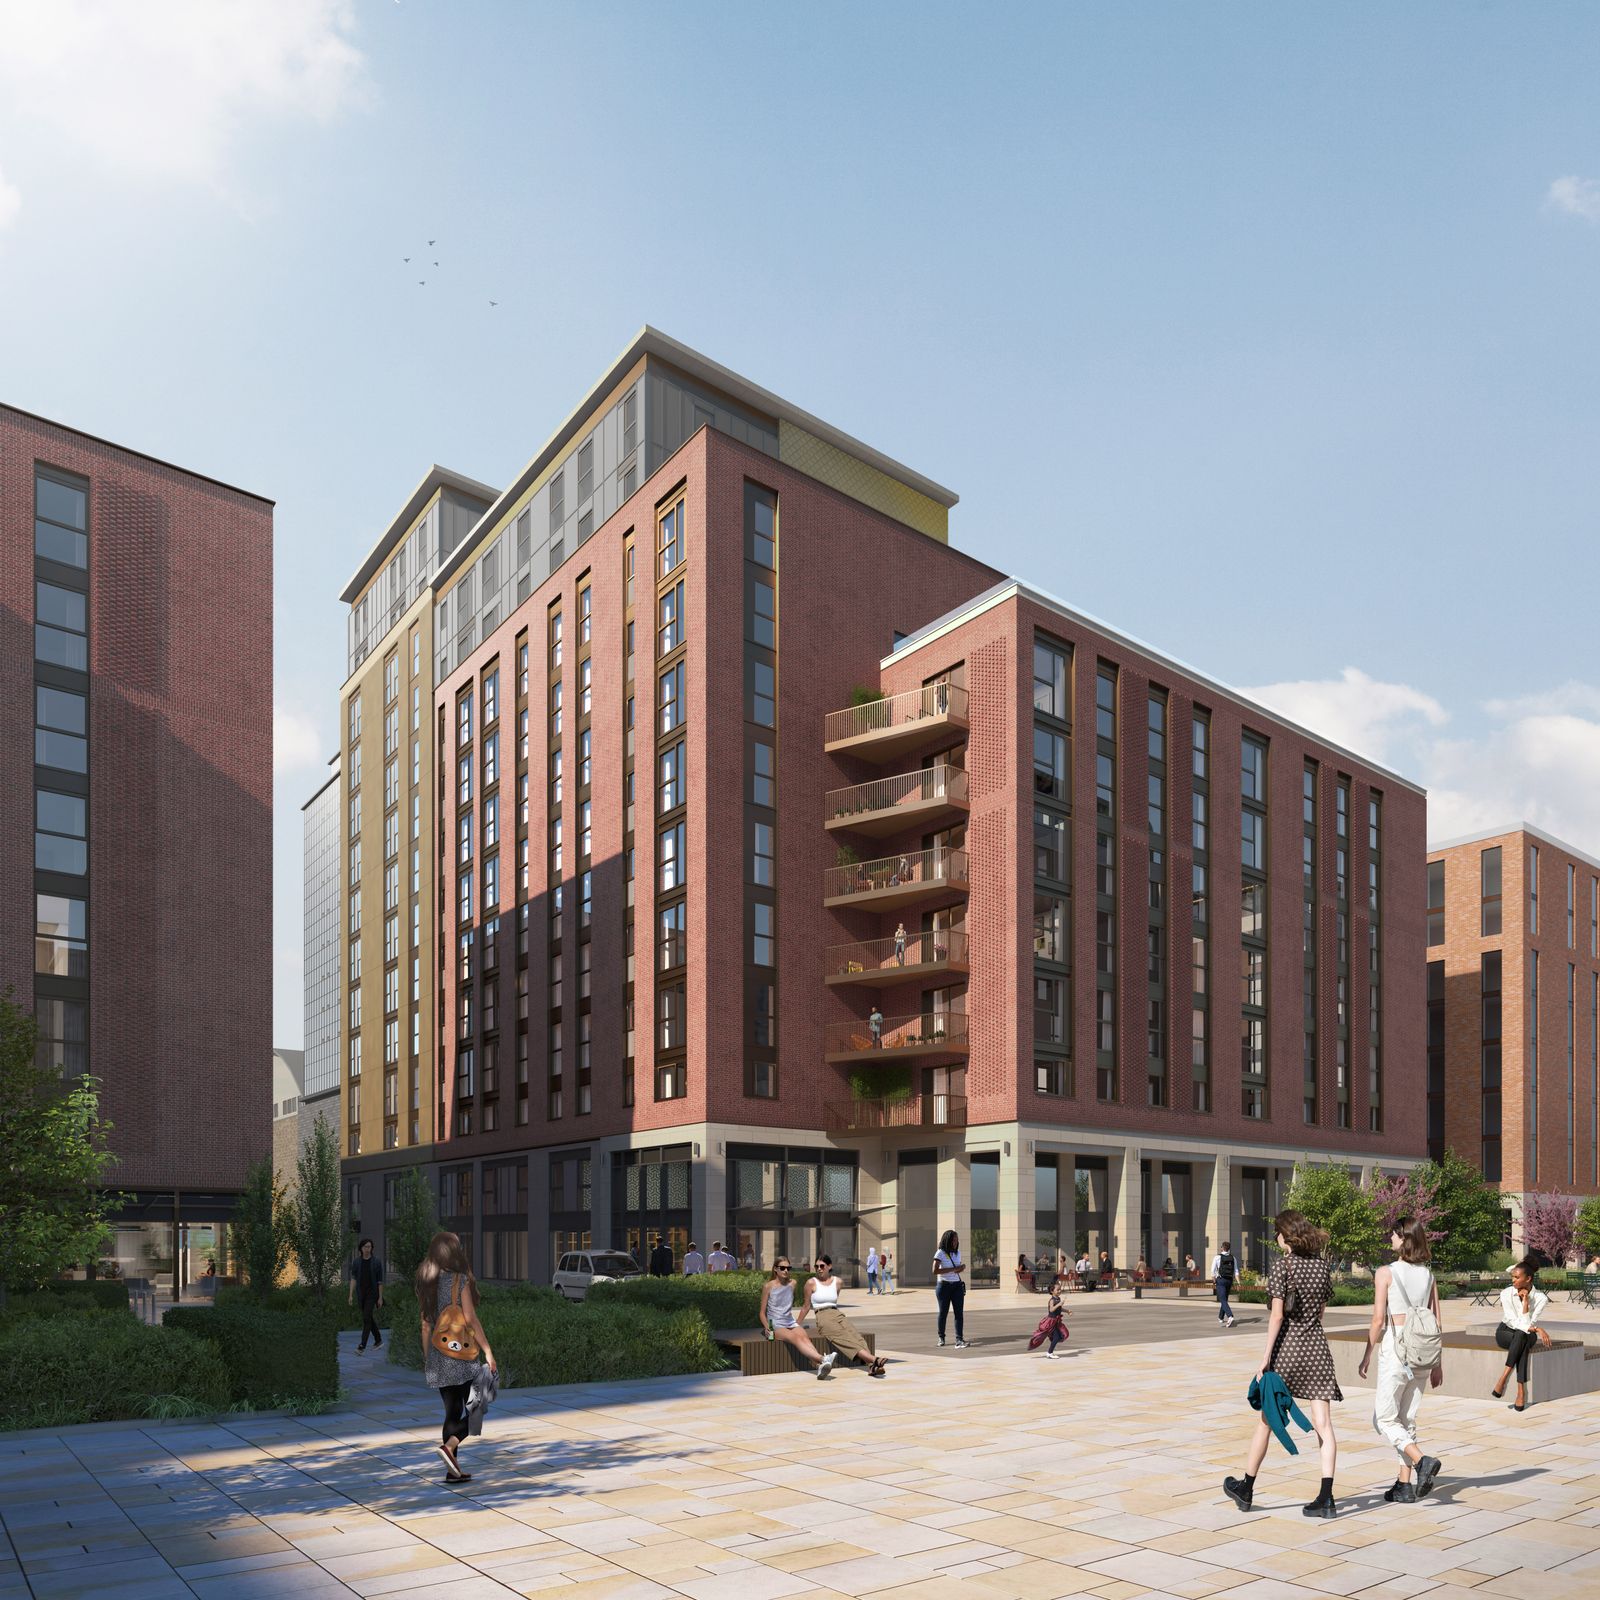 Deal will bring 331 new apartments to SOYO in next phase of landmark regeneration